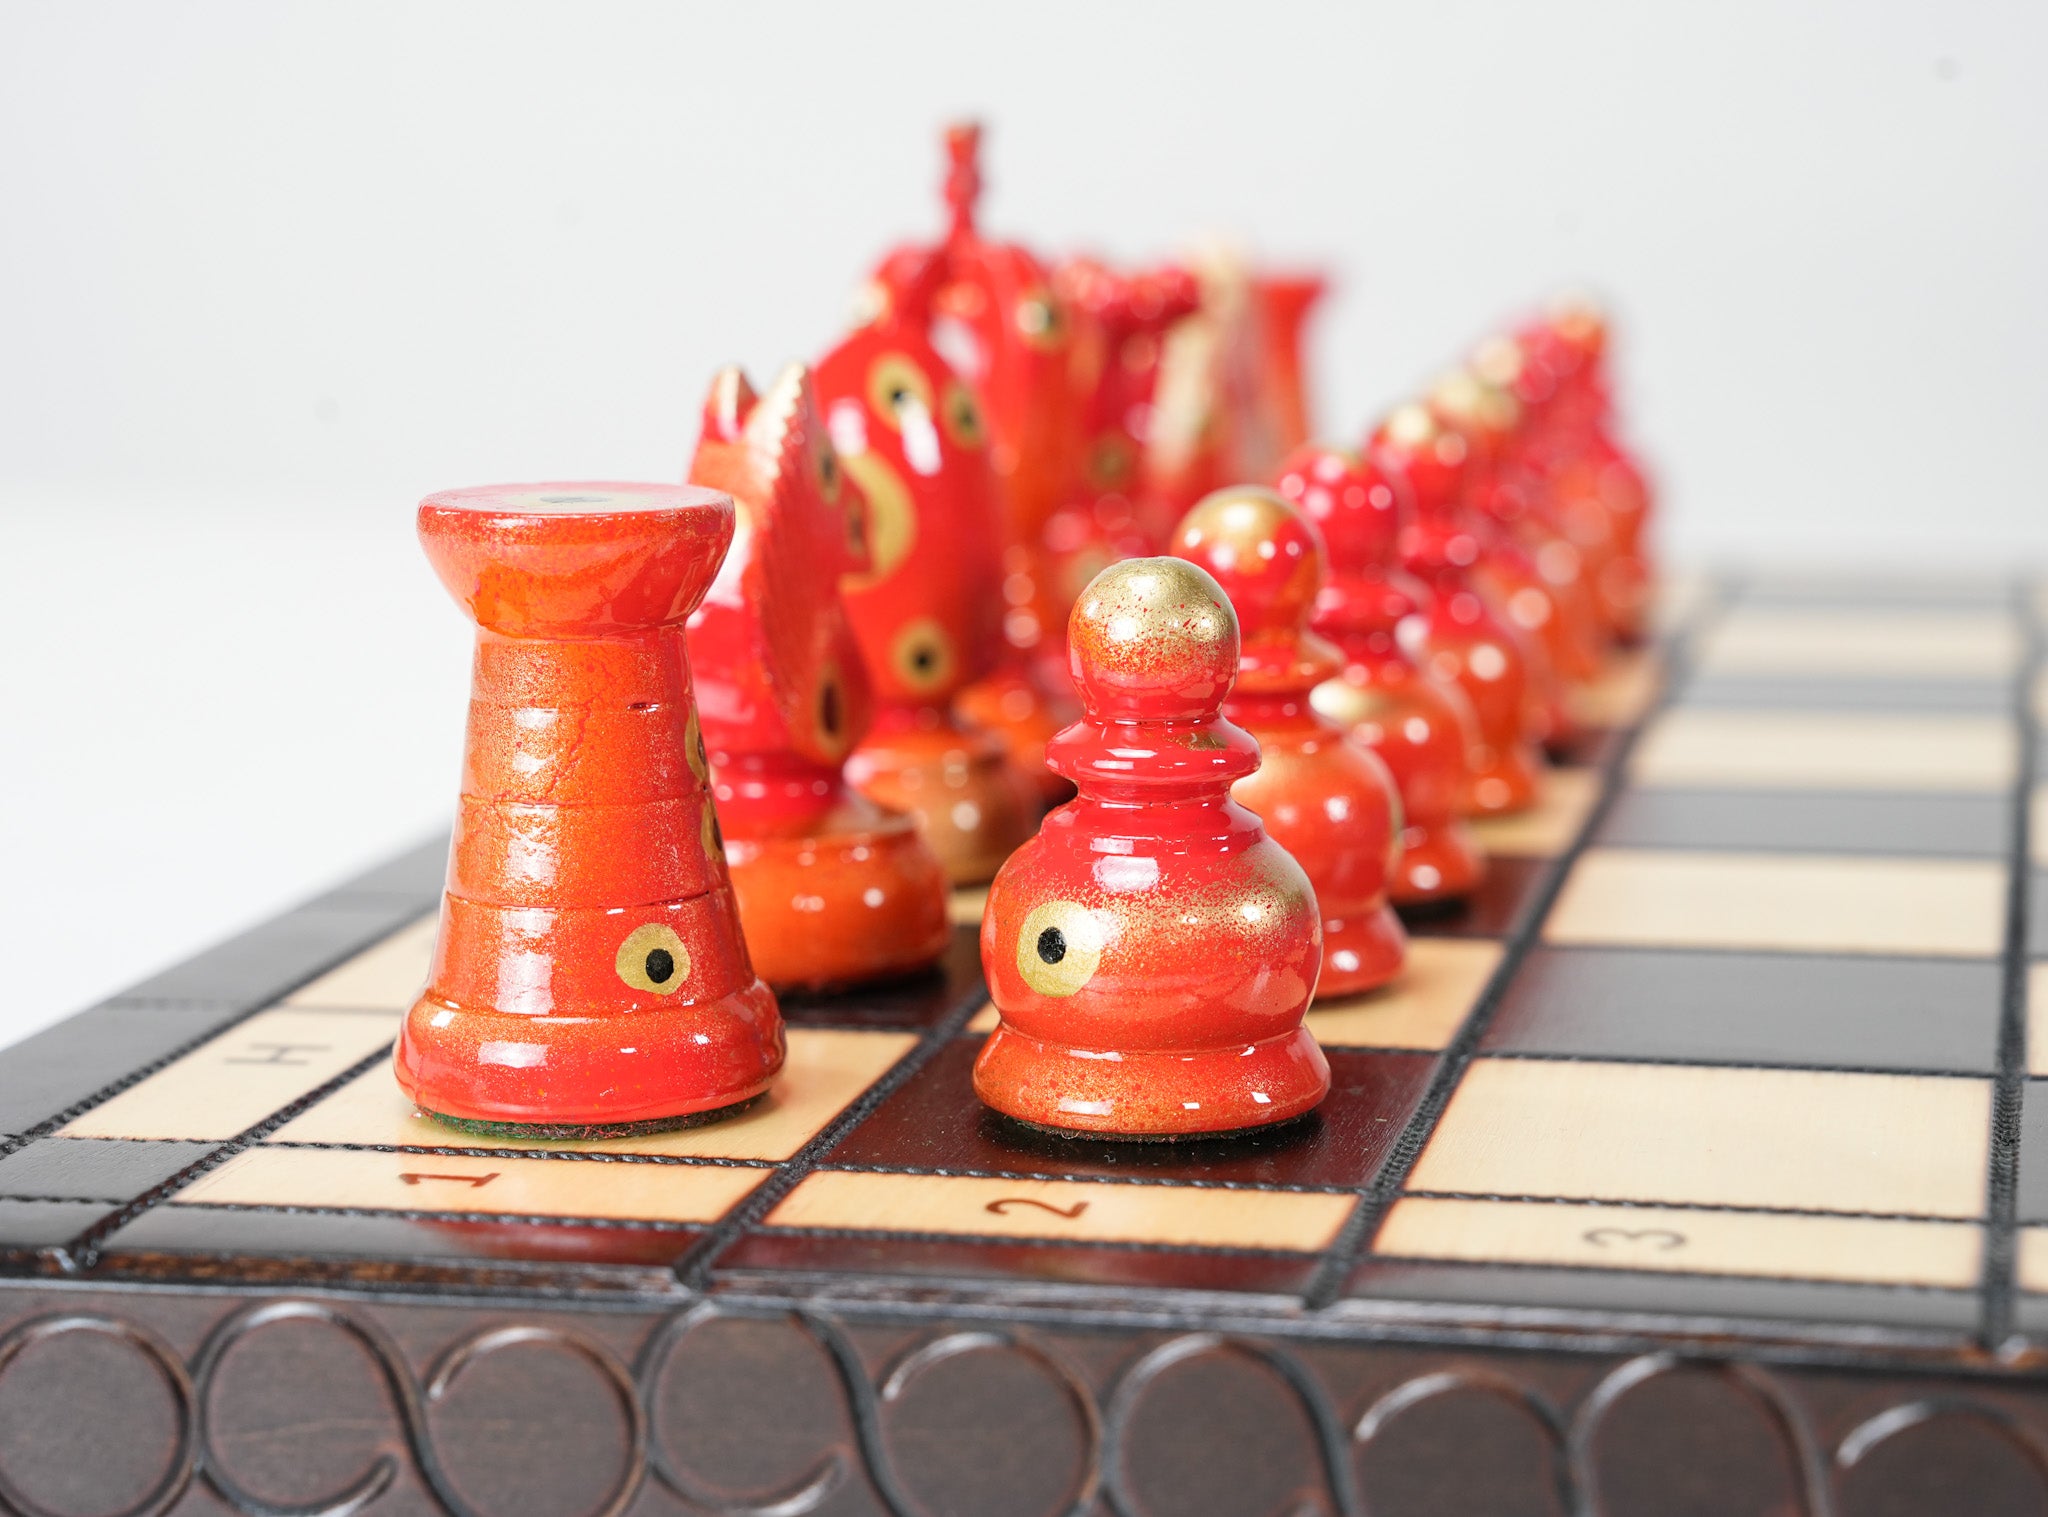 The Siren's Song - Sydney Gruber Painted 17" Large Kings Chess Set #6 - Chess Set - Chess-House